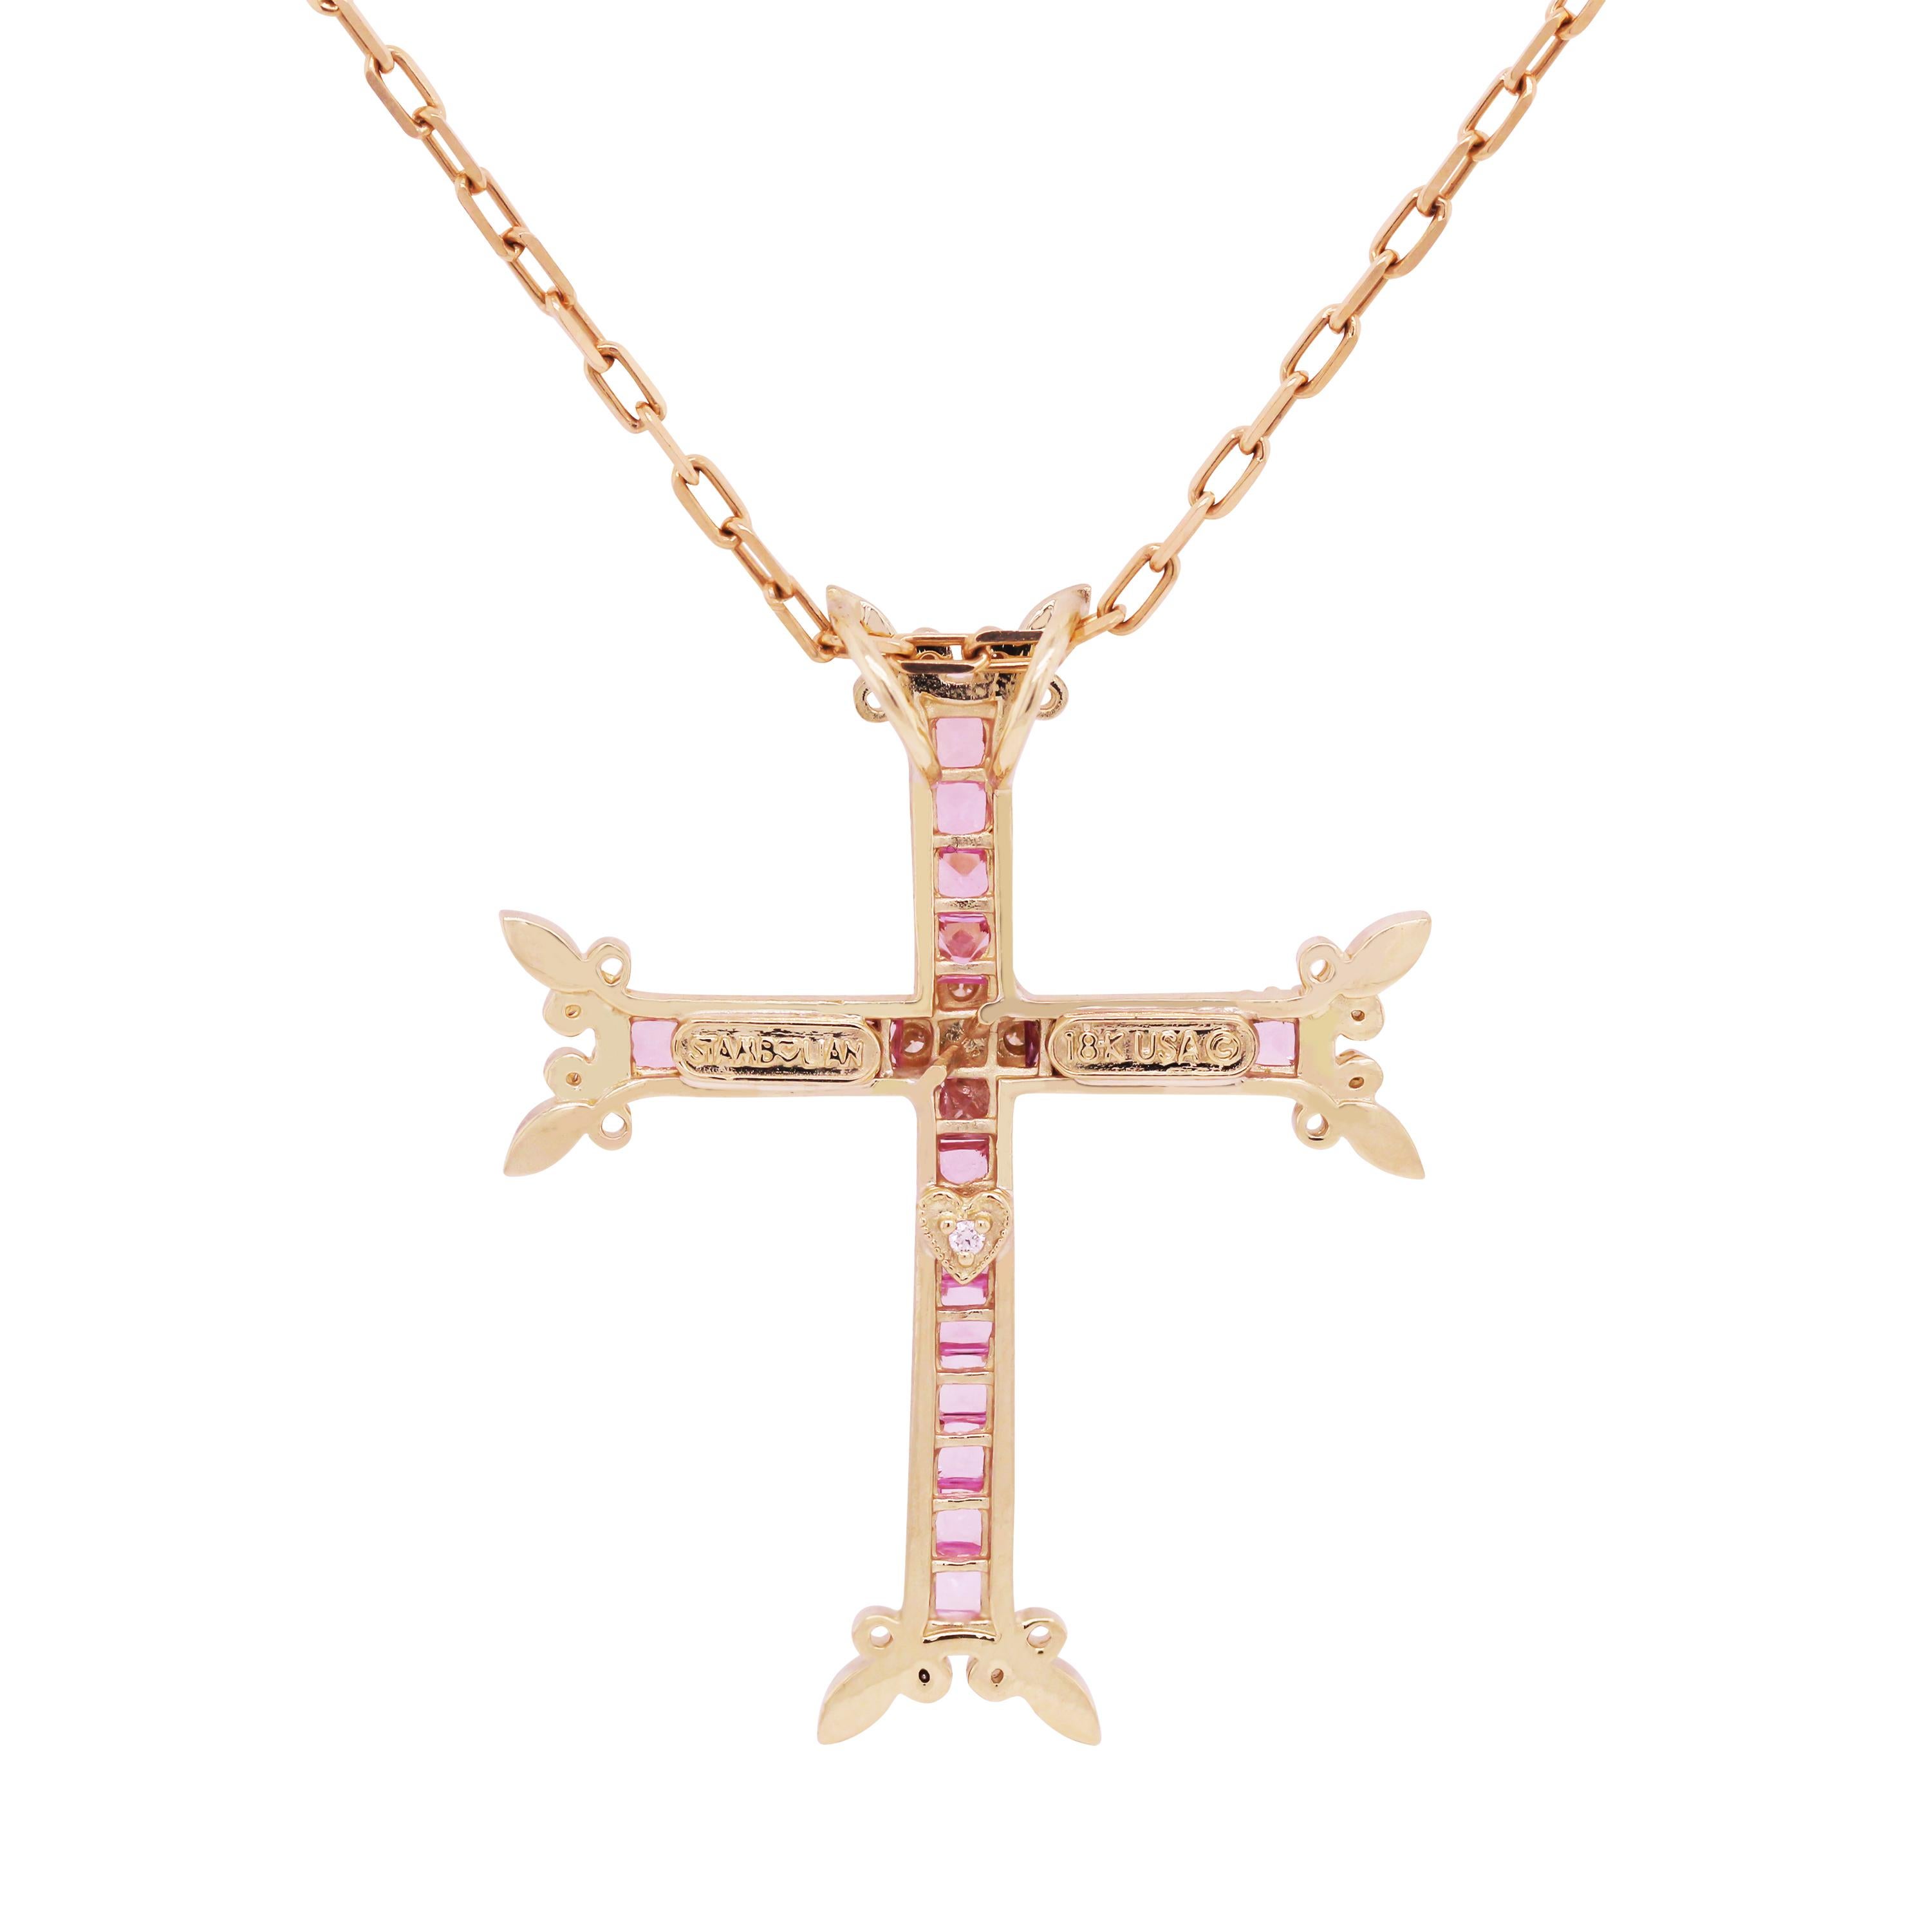 18K Yellow Gold and Diamond Cross Pendant with Princess-cut Pink Sapphires by Stambolian

This unique take on a cross is inspired by the Armenian cross with the floral corners

2.50 carat Pink sapphires total weight. Sapphires are all princess